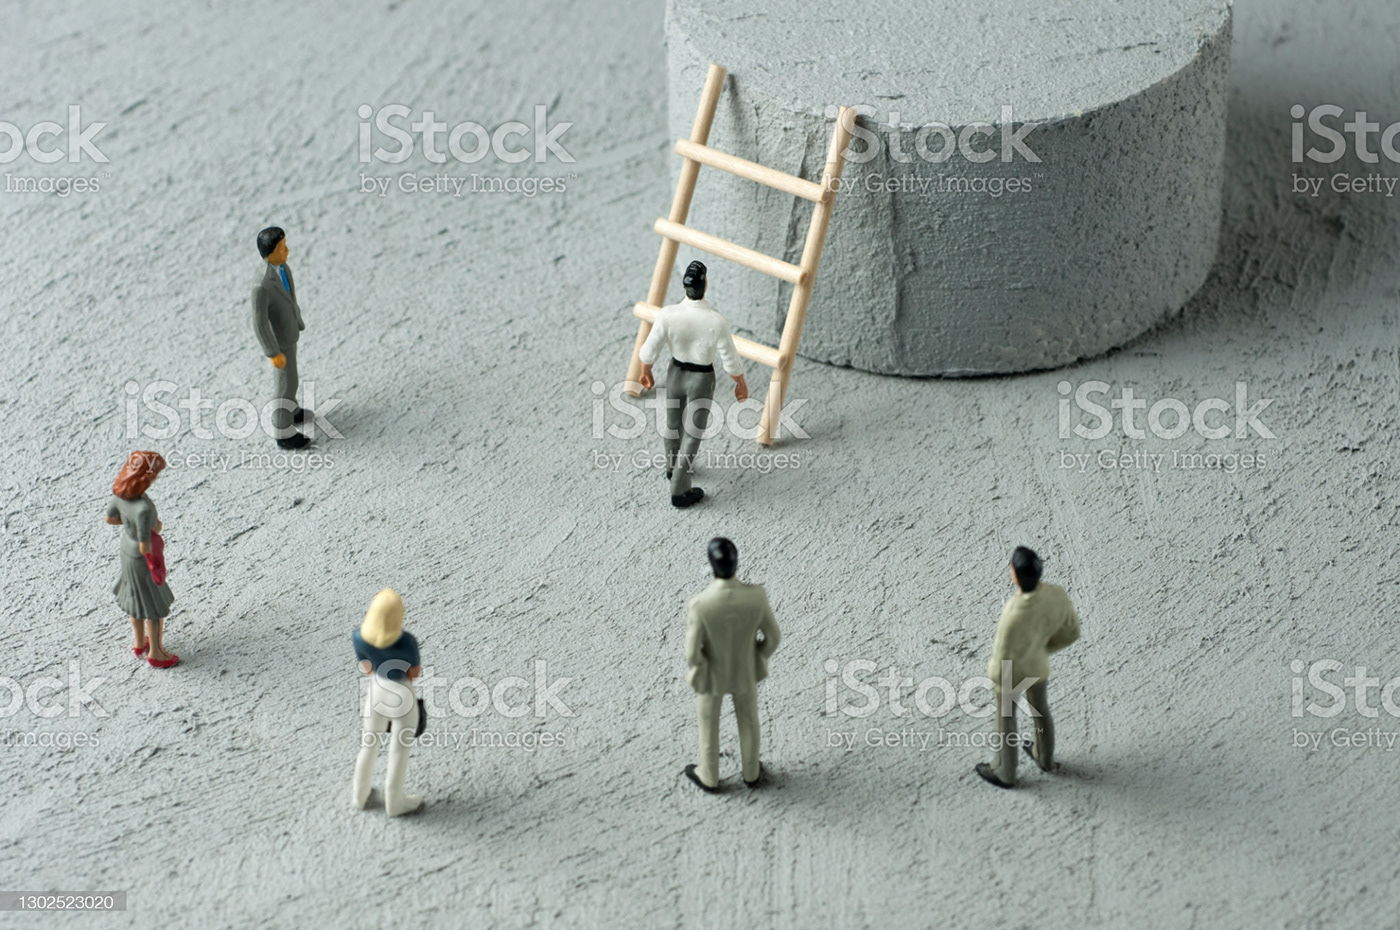 business business person Corporate Hierarchy economy figurine Global risk strategy TEAMWORK